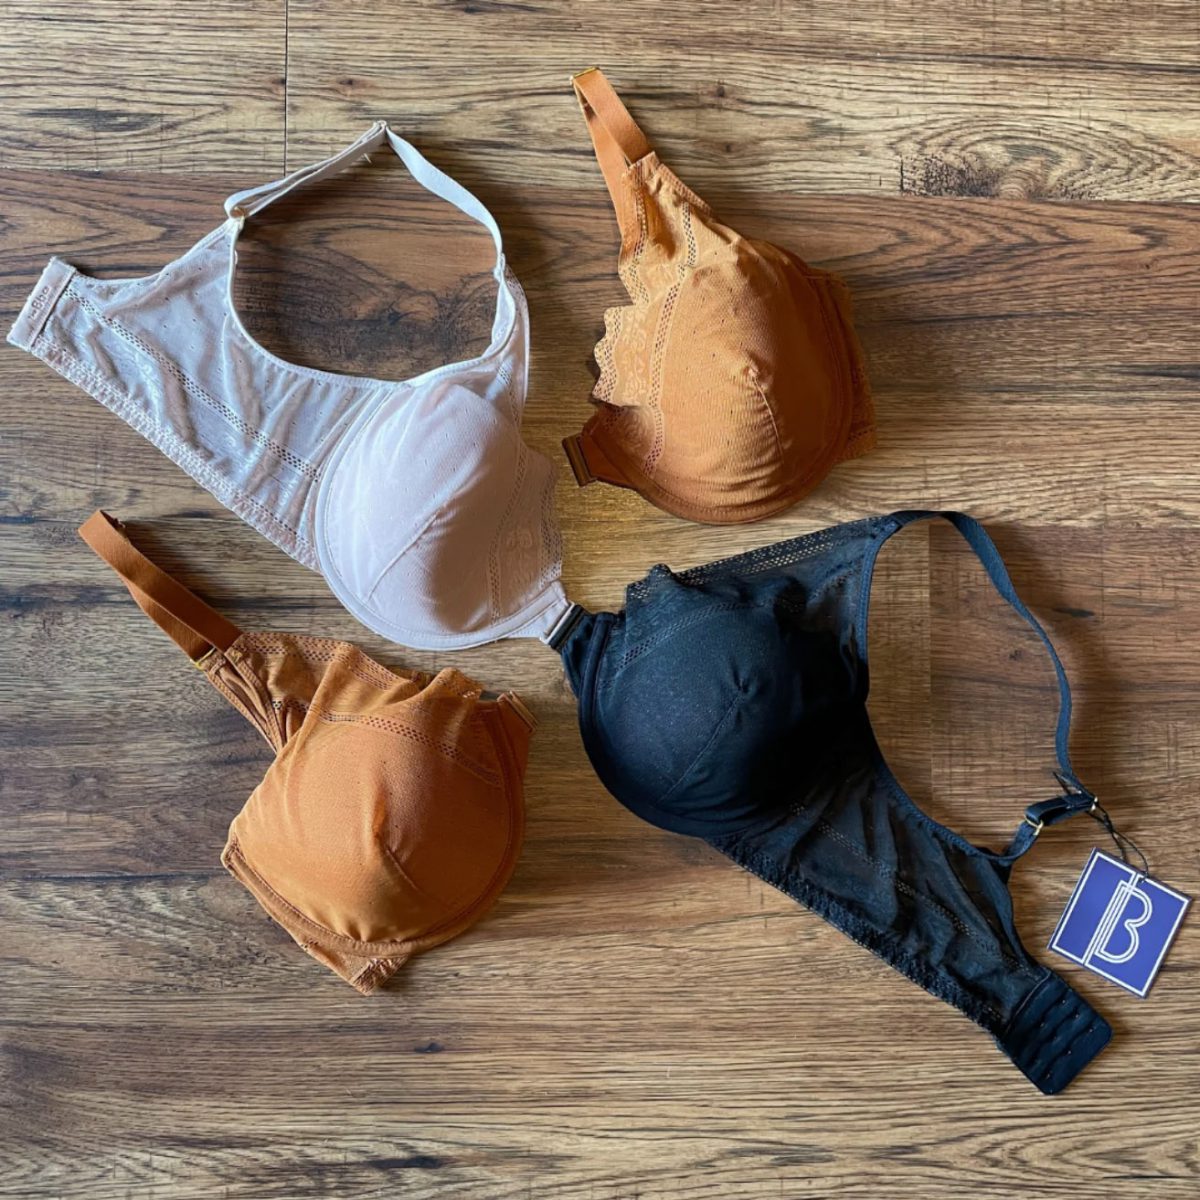 Fit Advice & Bra Brands Designed for Asymmetrical Breasts